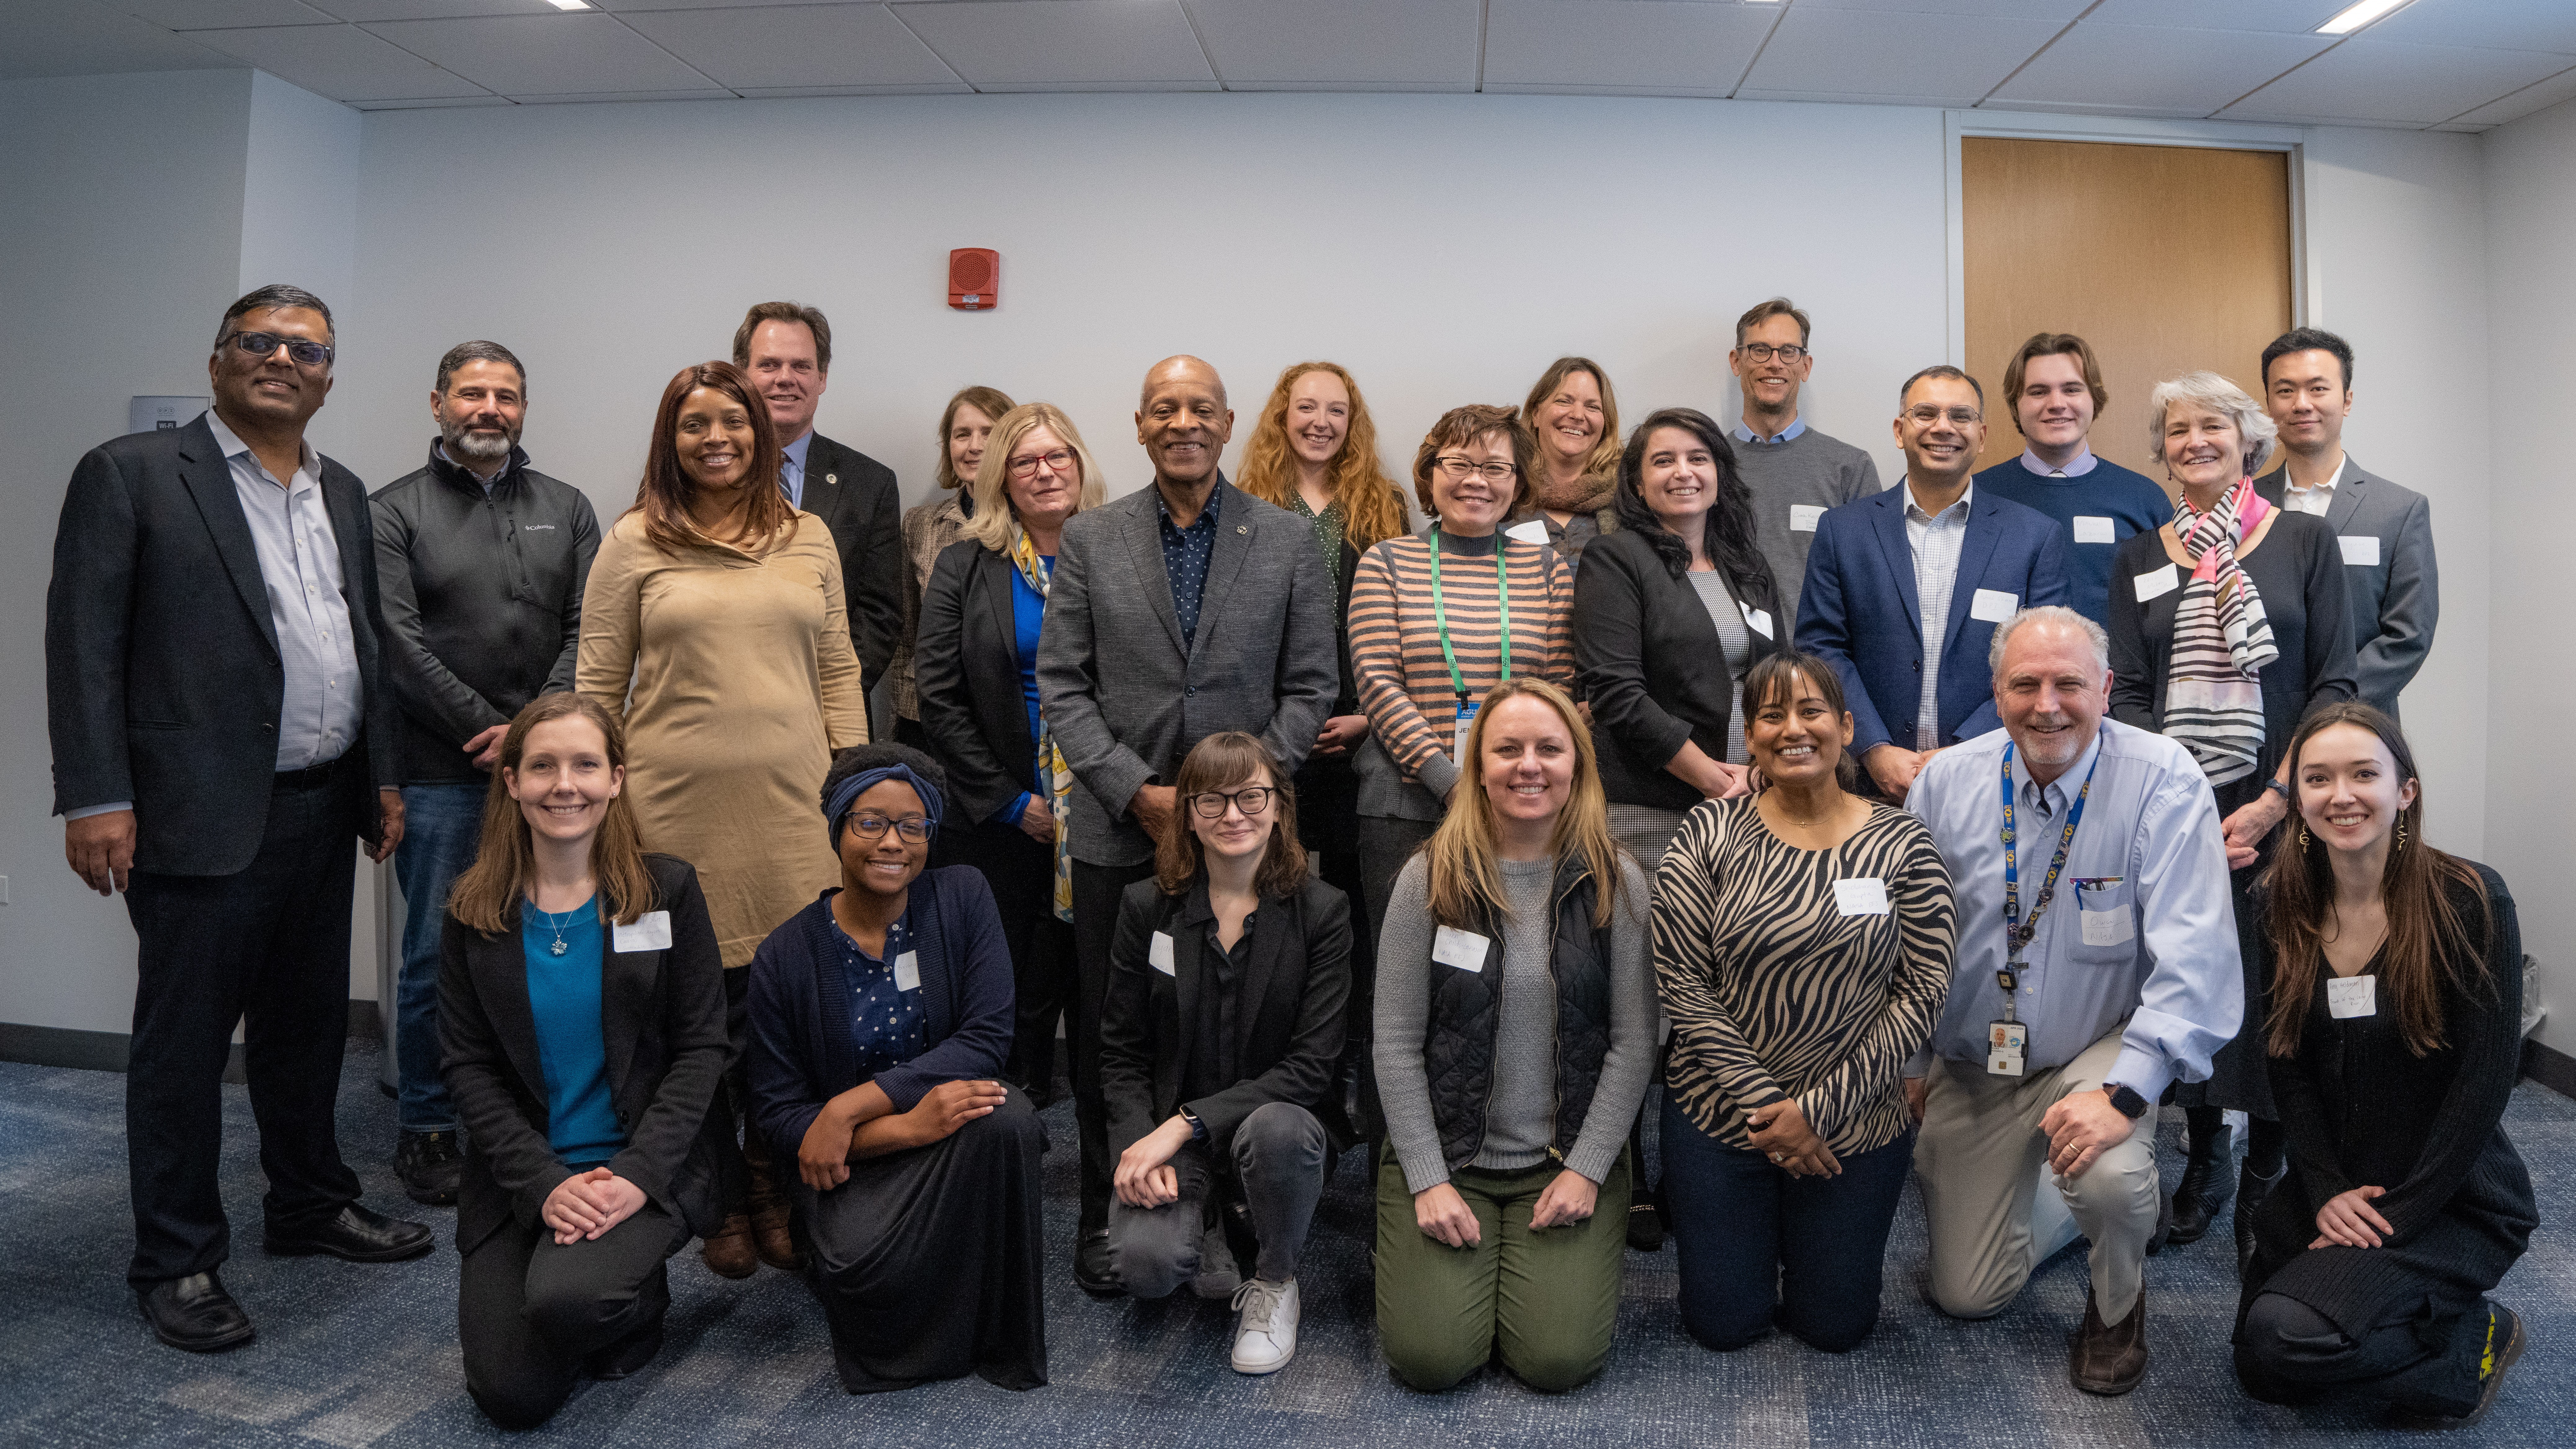 Environmental Justice leaders in Chicago met with NASA team members and the science team behind e-JUST, a scalable urban toolkit for Environmental Justice.